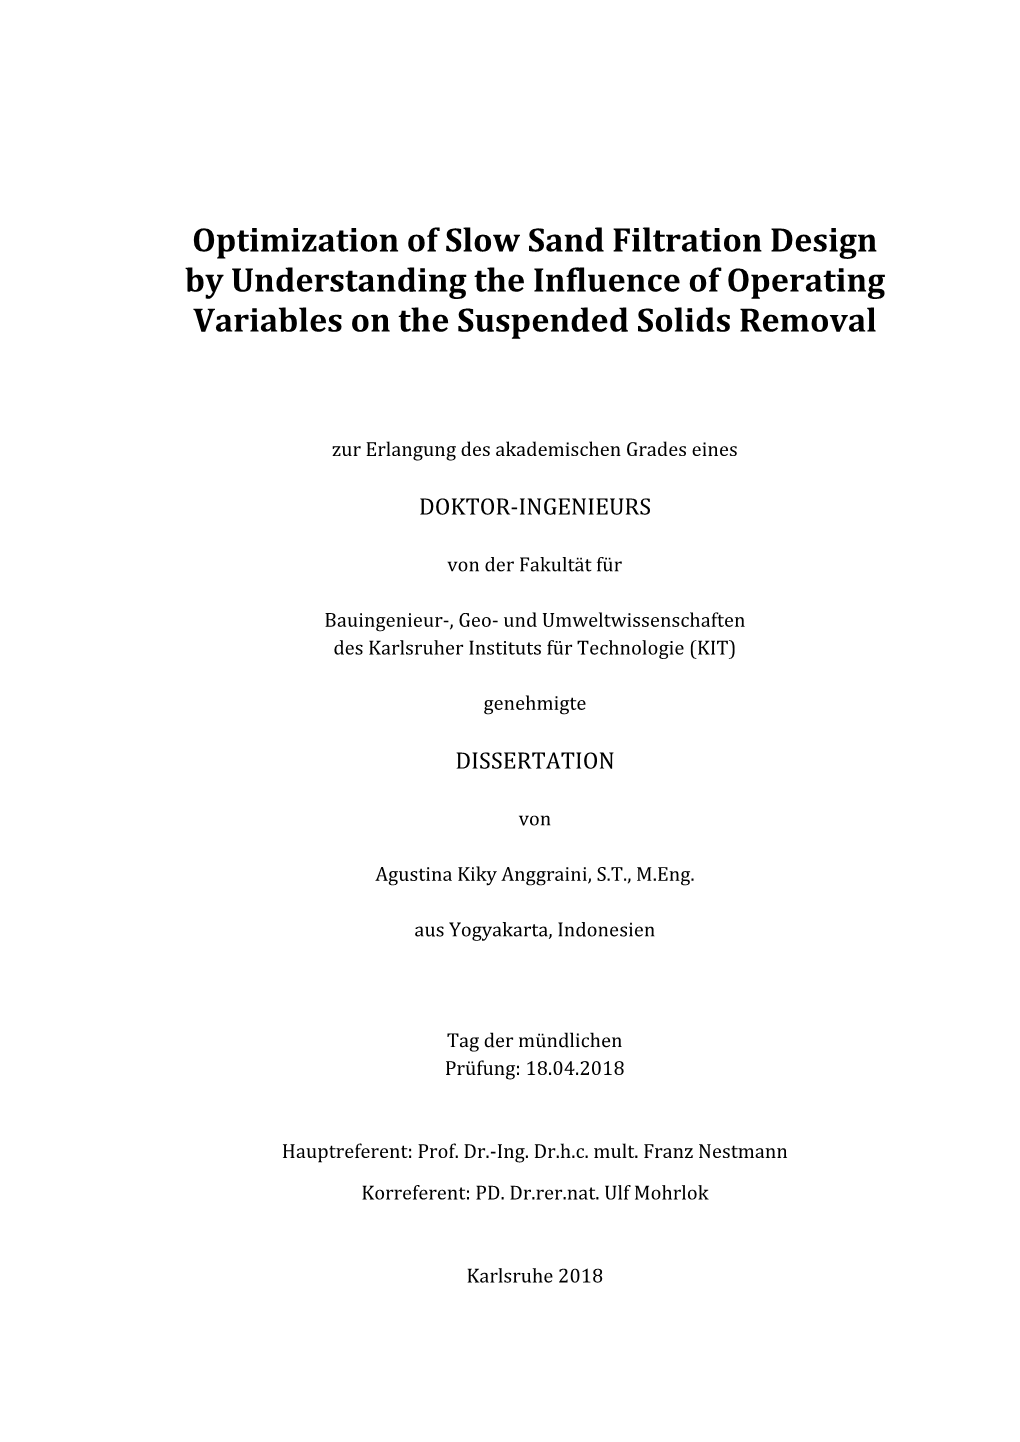 Optimization of Slow Sand Filtration Design by Understanding the Influence of Operating Variables on the Suspended Solids Removal